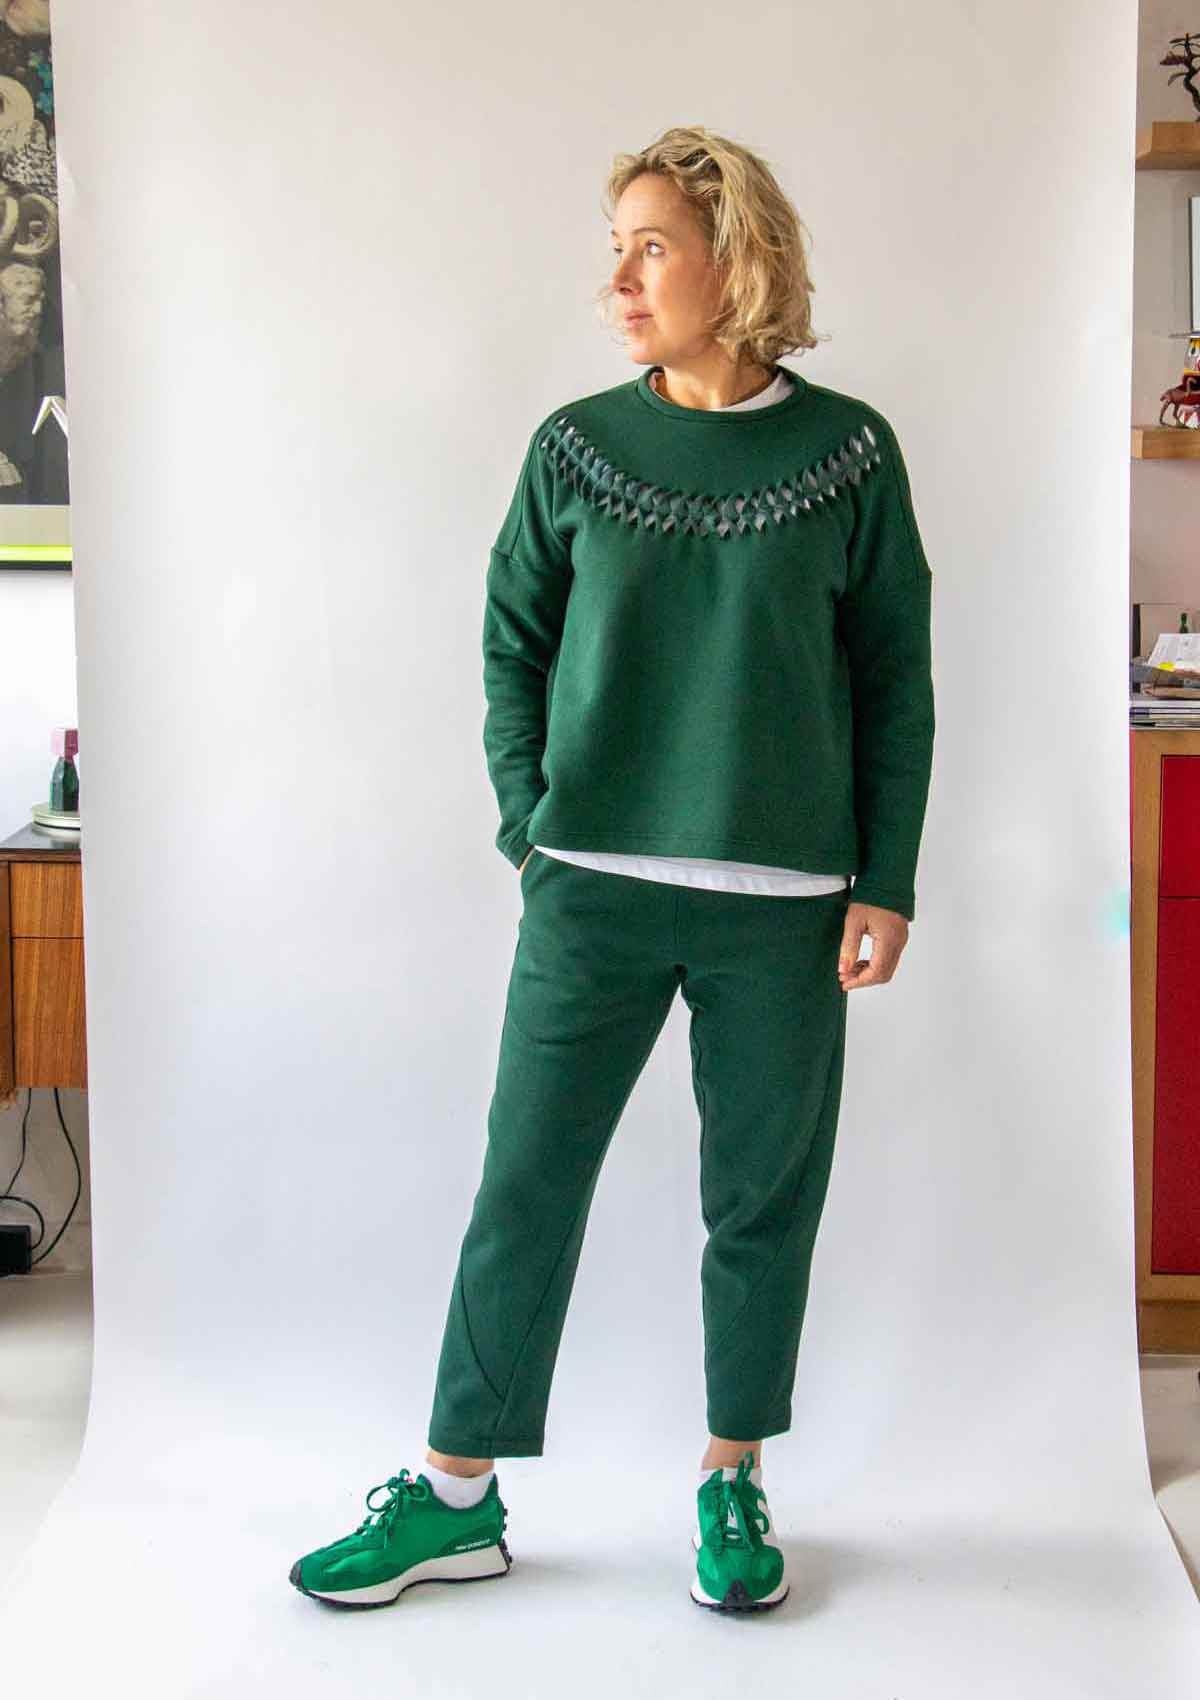 Woman, with short wavy blond hair, wearing the Asmuss Curve Joggers in Trekking Green and the Anni Sweatshirt in Trekking Green, standing with weight on one foot and looking to her right